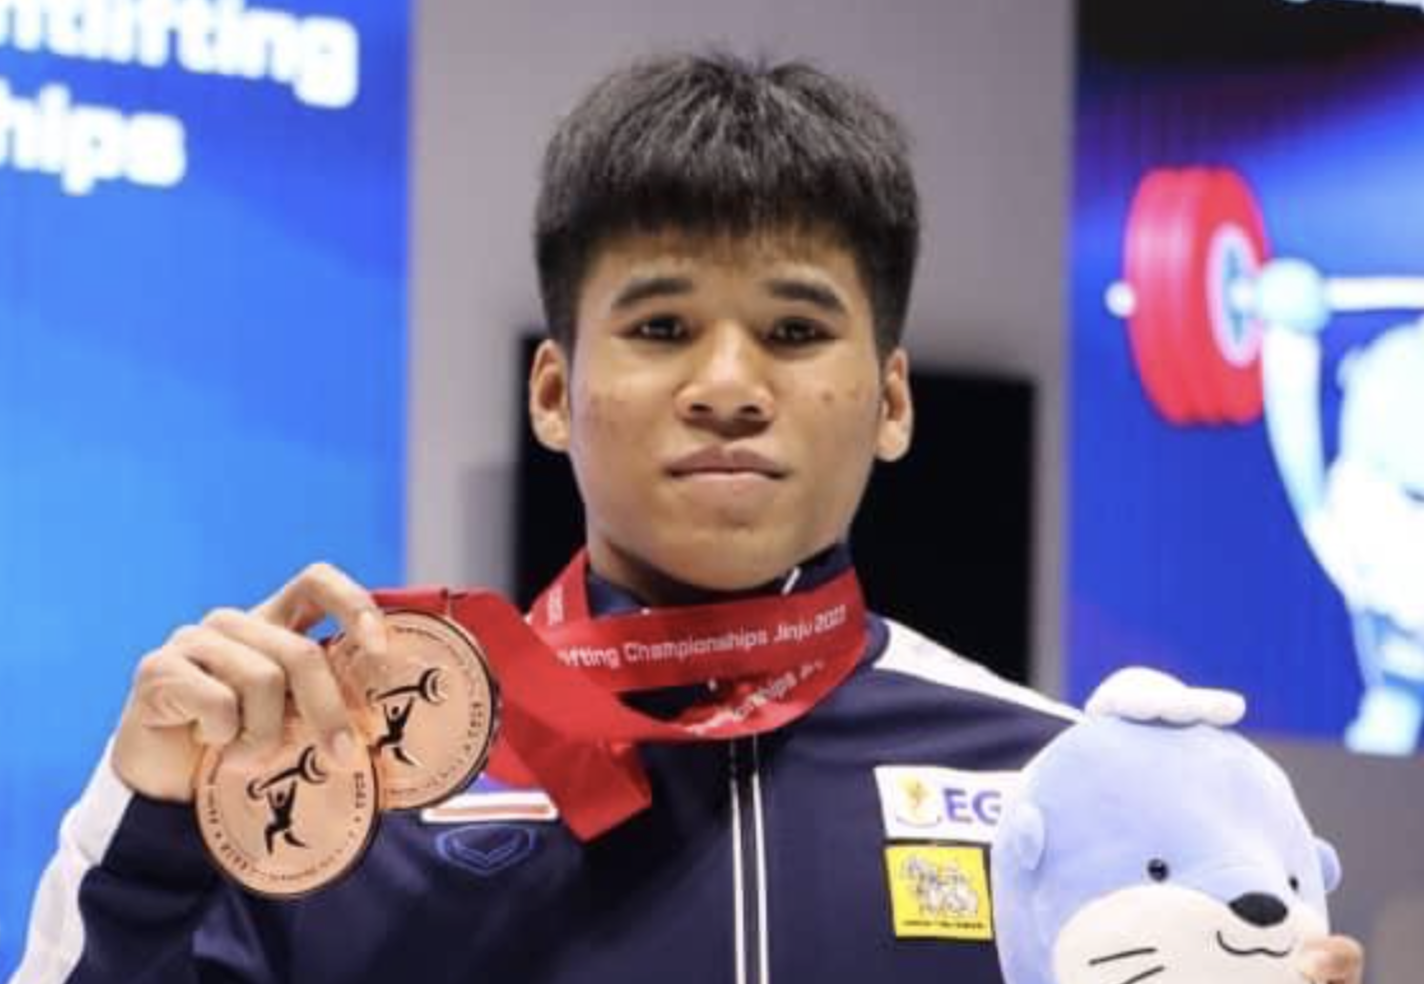 Thai teenager Therapong Silachai with his medals ©Brian Oliver